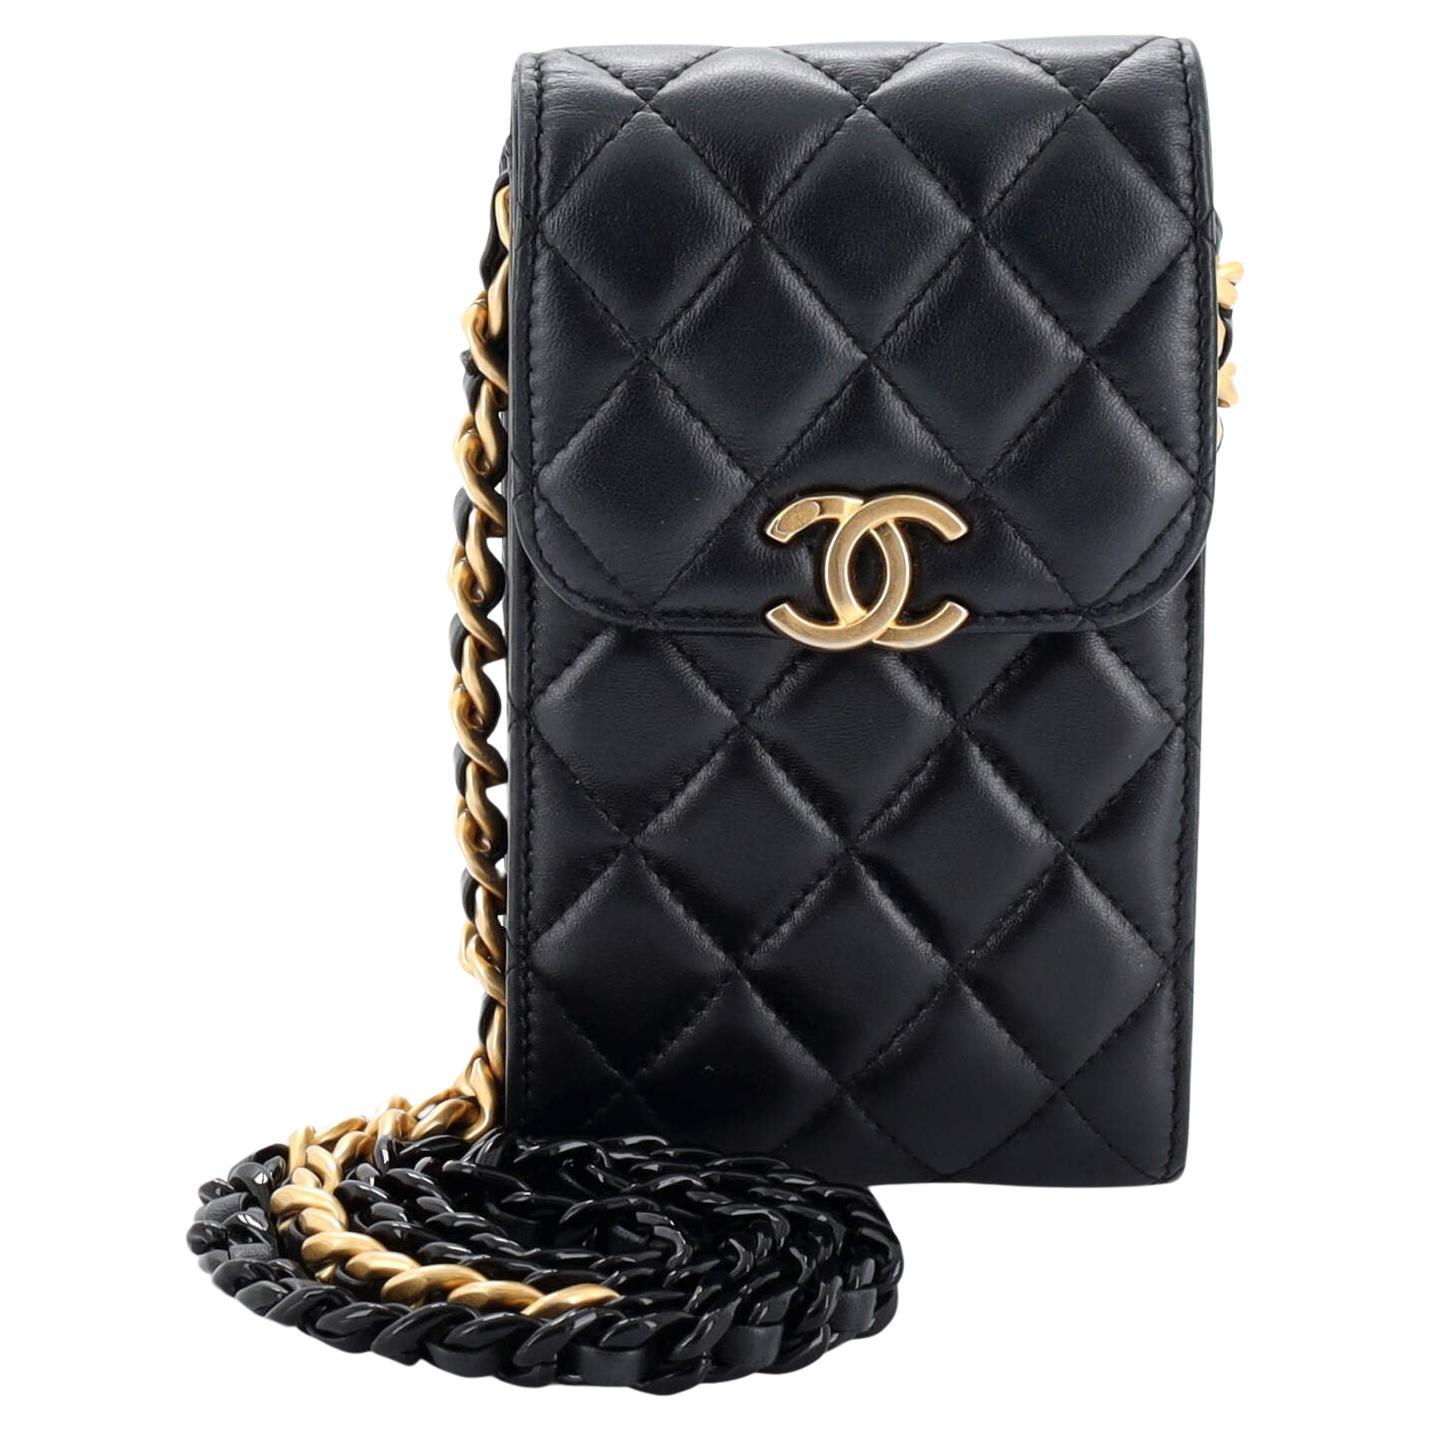 Chanel Pre-Owned Chanel Lime Lambskin Small Double Flap Bag